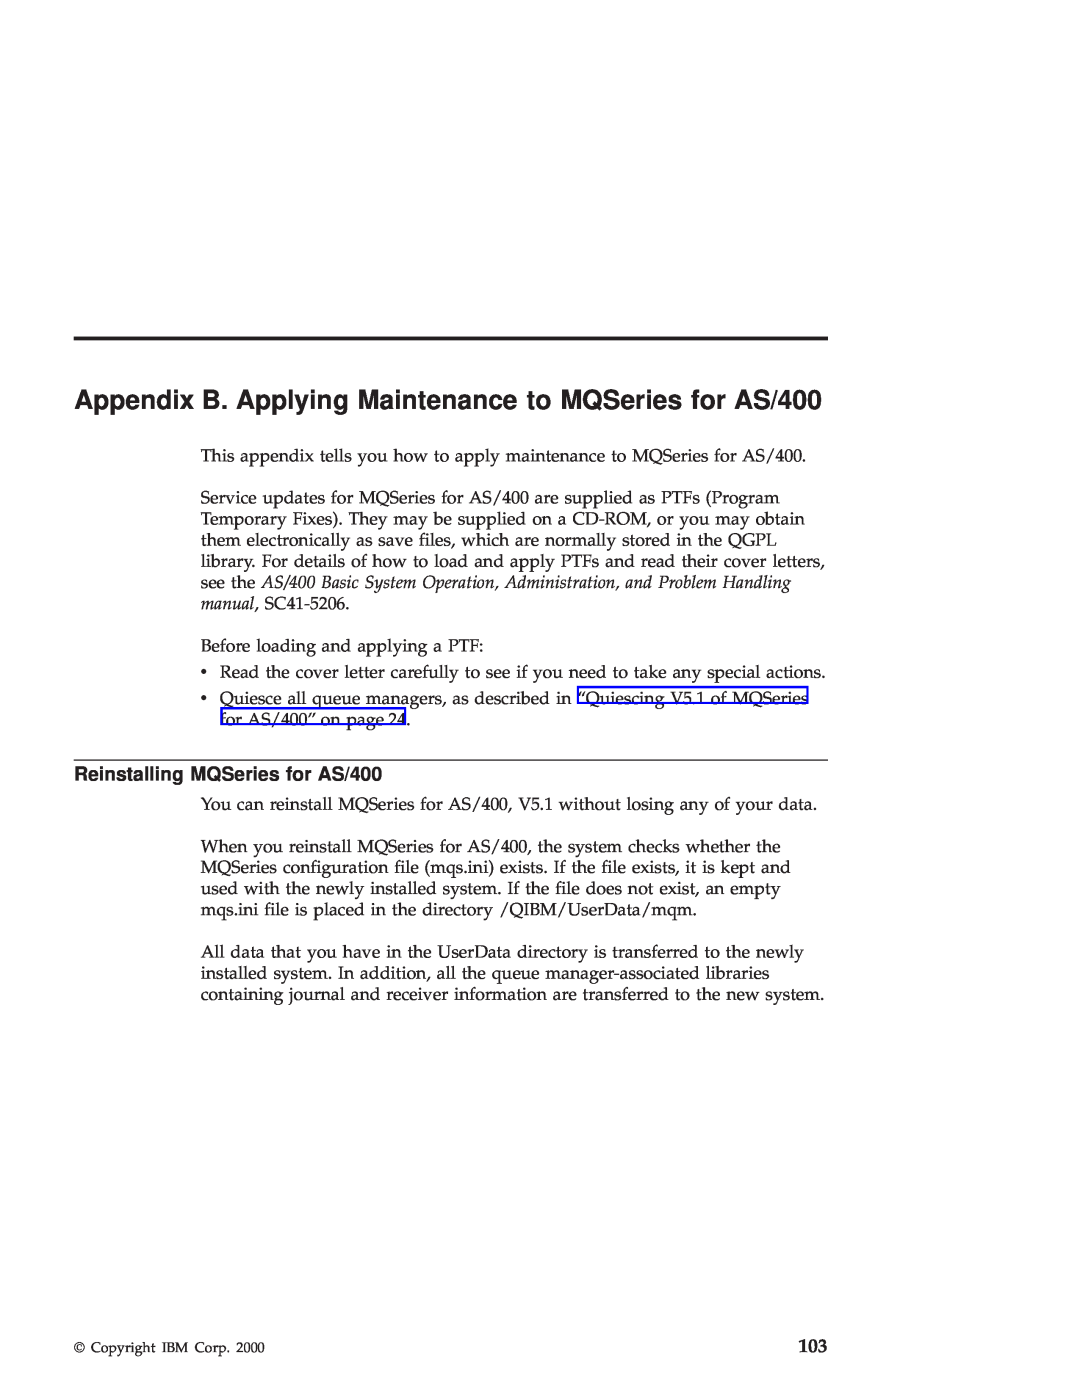 IBM GC34-5557-00 manual Appendix B. Applying Maintenance to MQSeries for AS/400, Reinstalling MQSeries for AS/400 